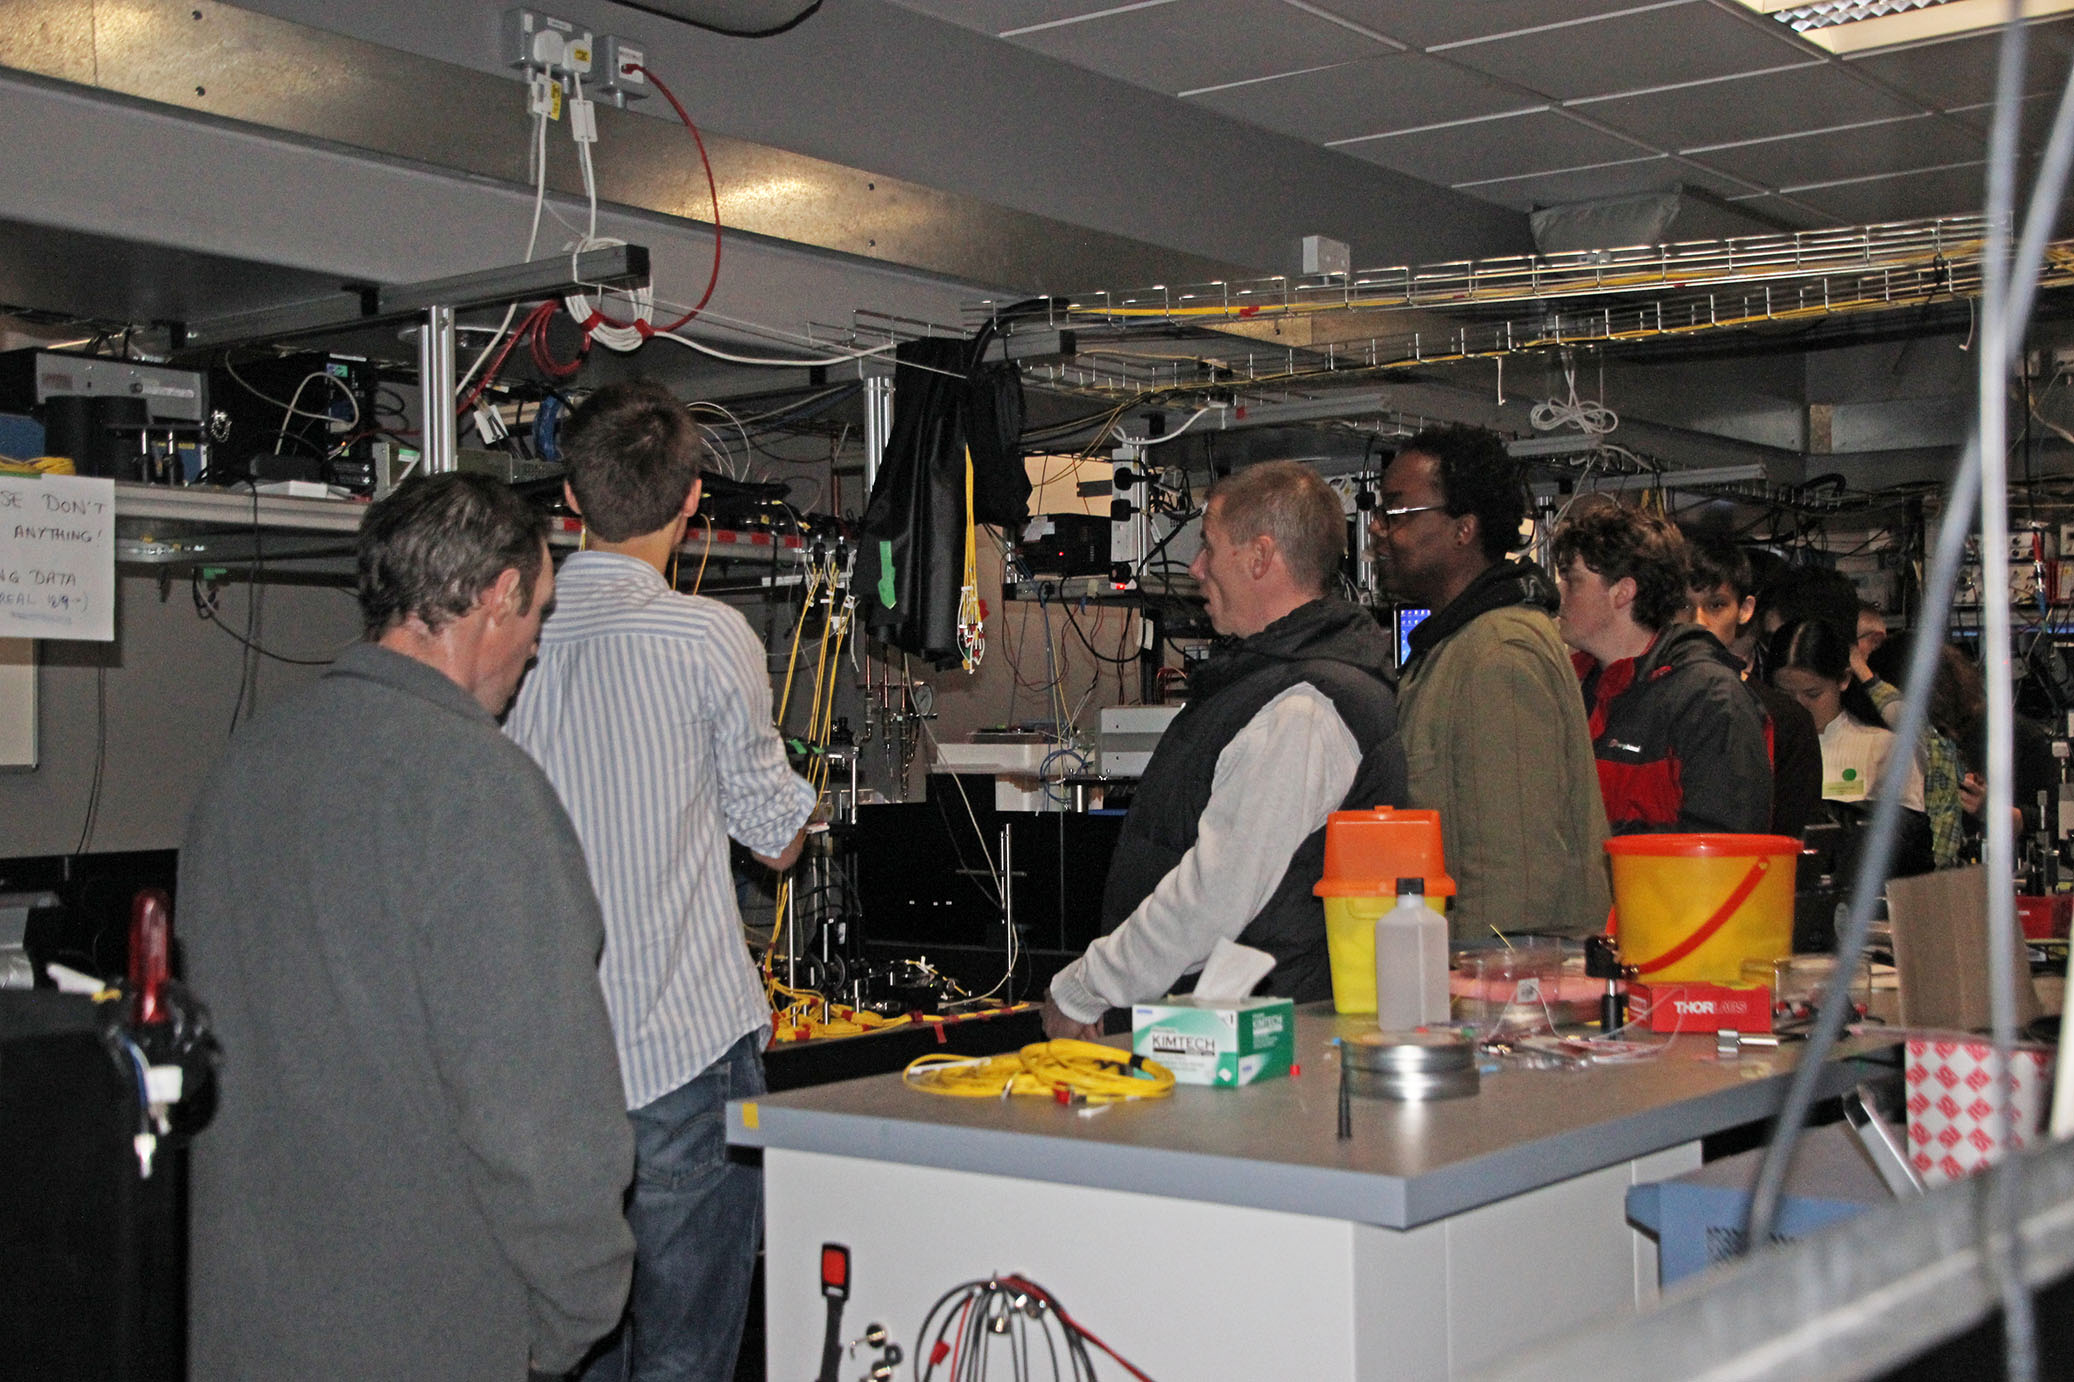 Lab tours at the Evening of Quantum Discovery / Credit: Olga Brecht, NQIT